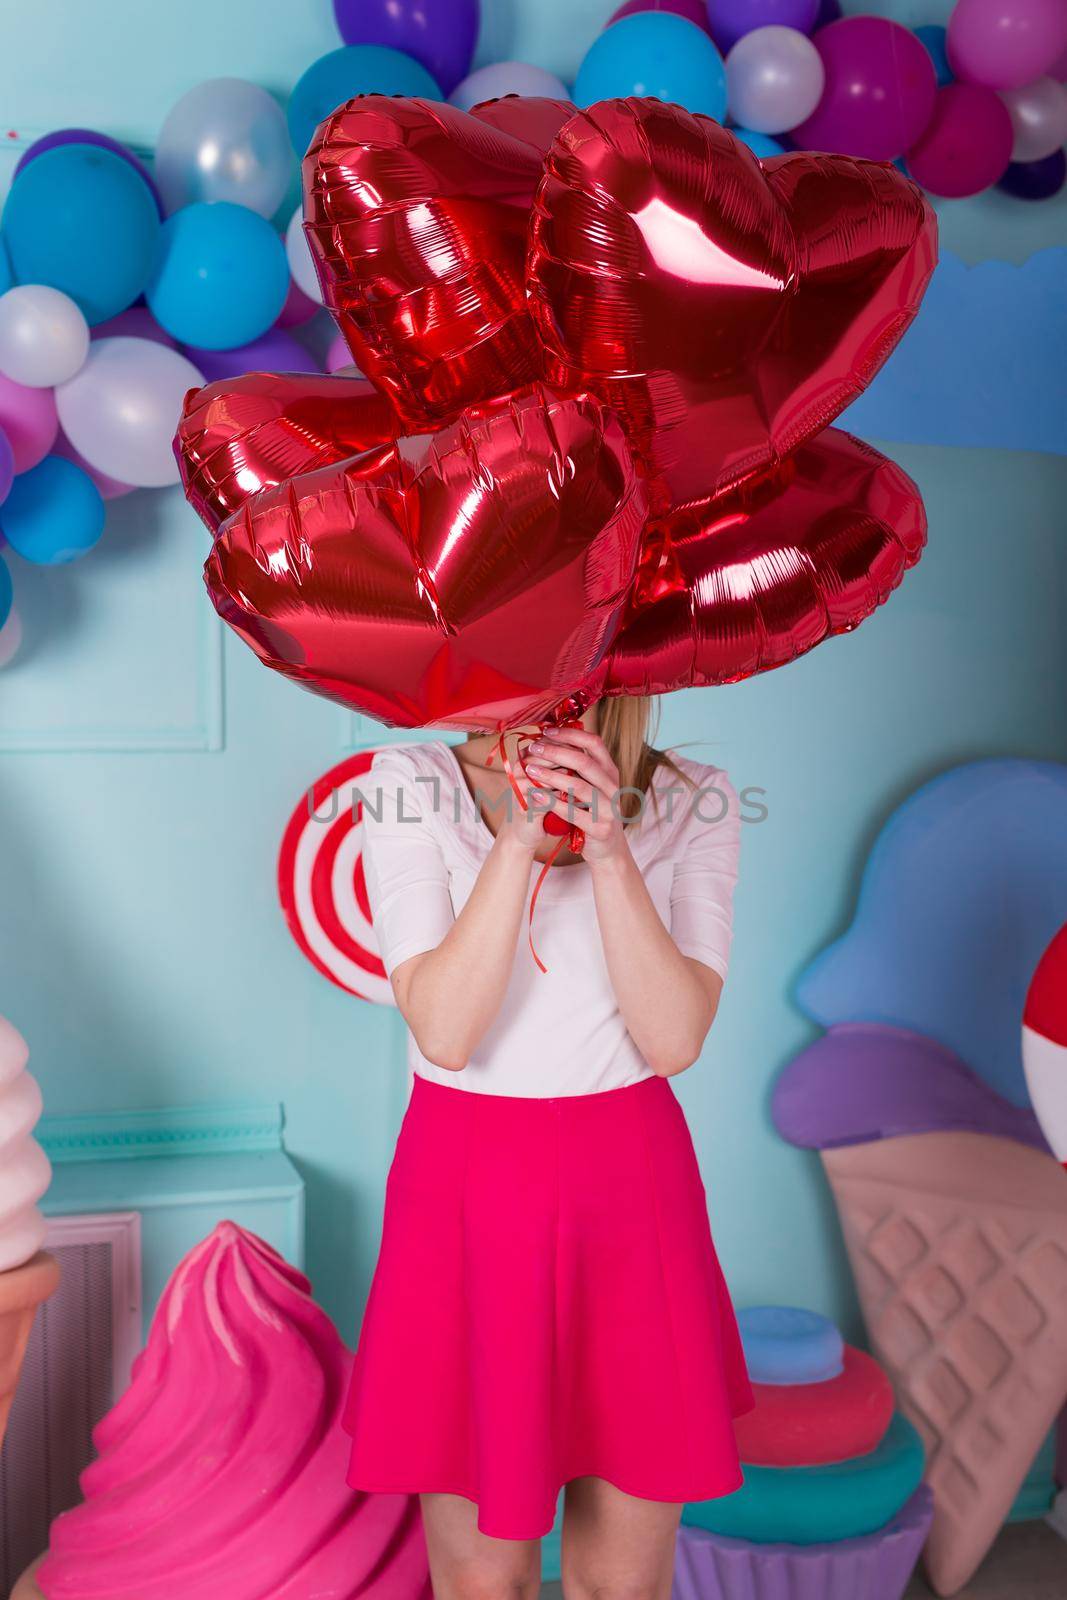 Fashion portrait of young woman in pink dress with an air balloons, candy on a colorful background.